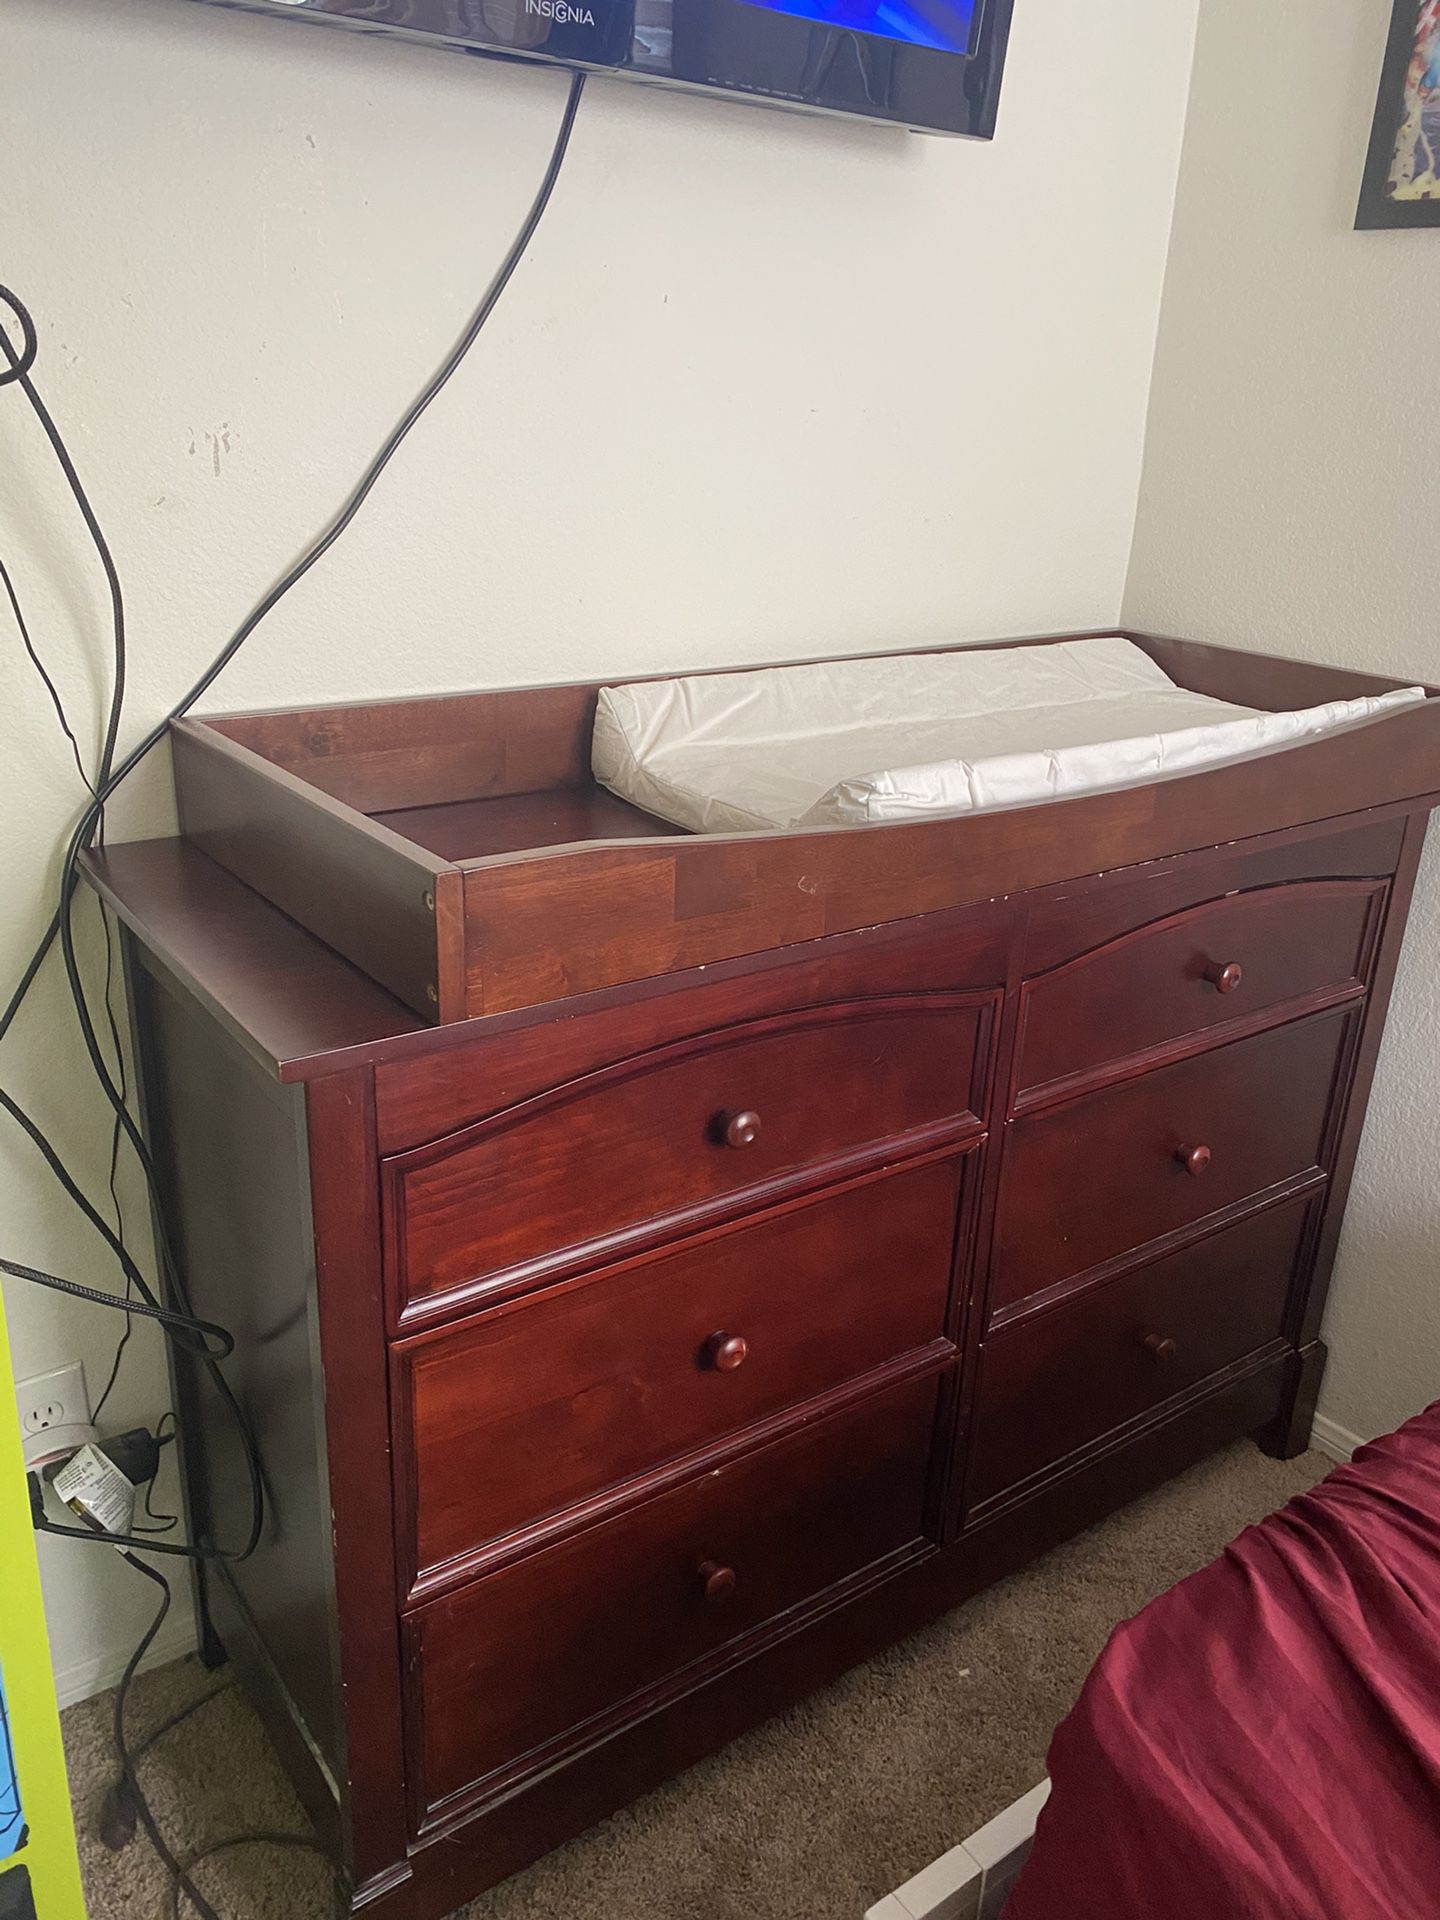 Dresser with changing table and pad